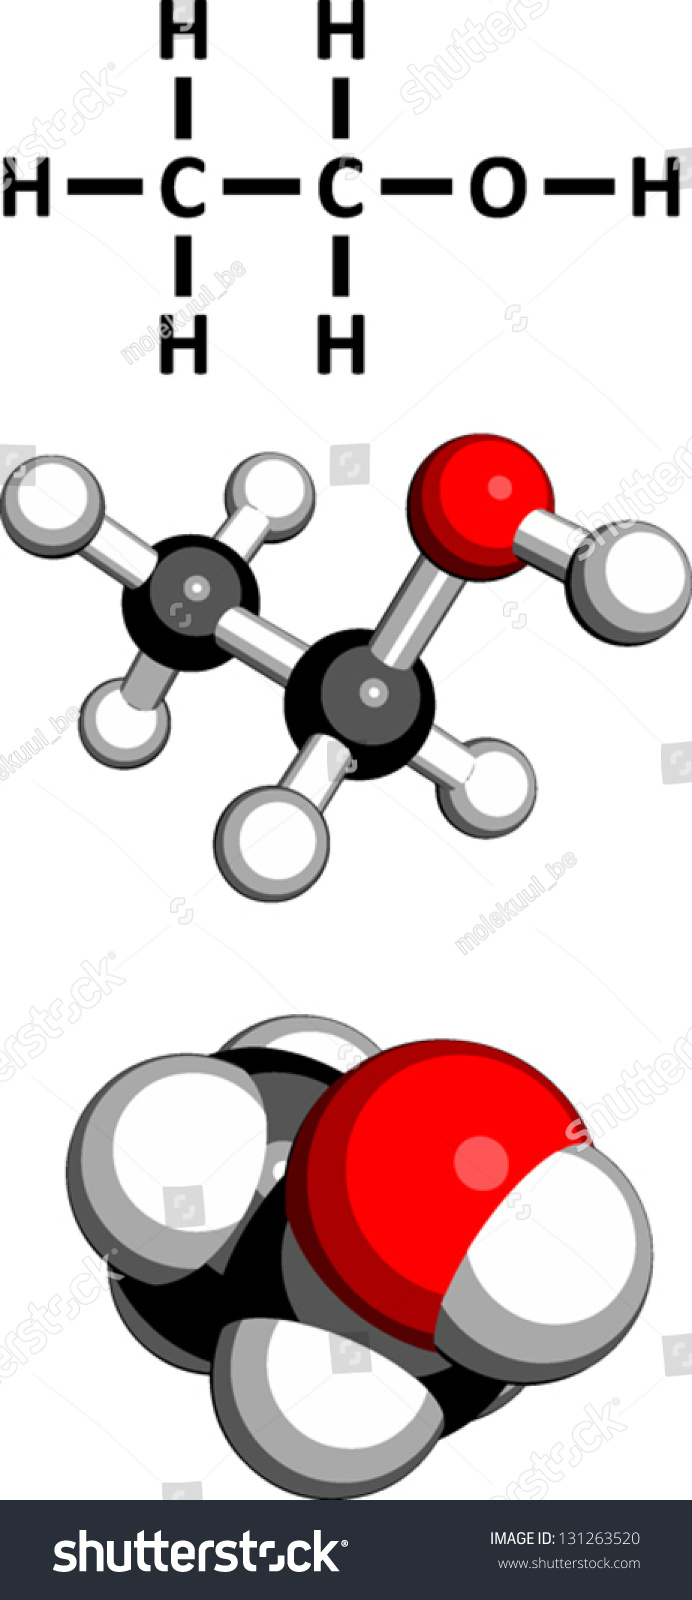 Ethanol Alcohol Molecule Chemical Structure Three Representations